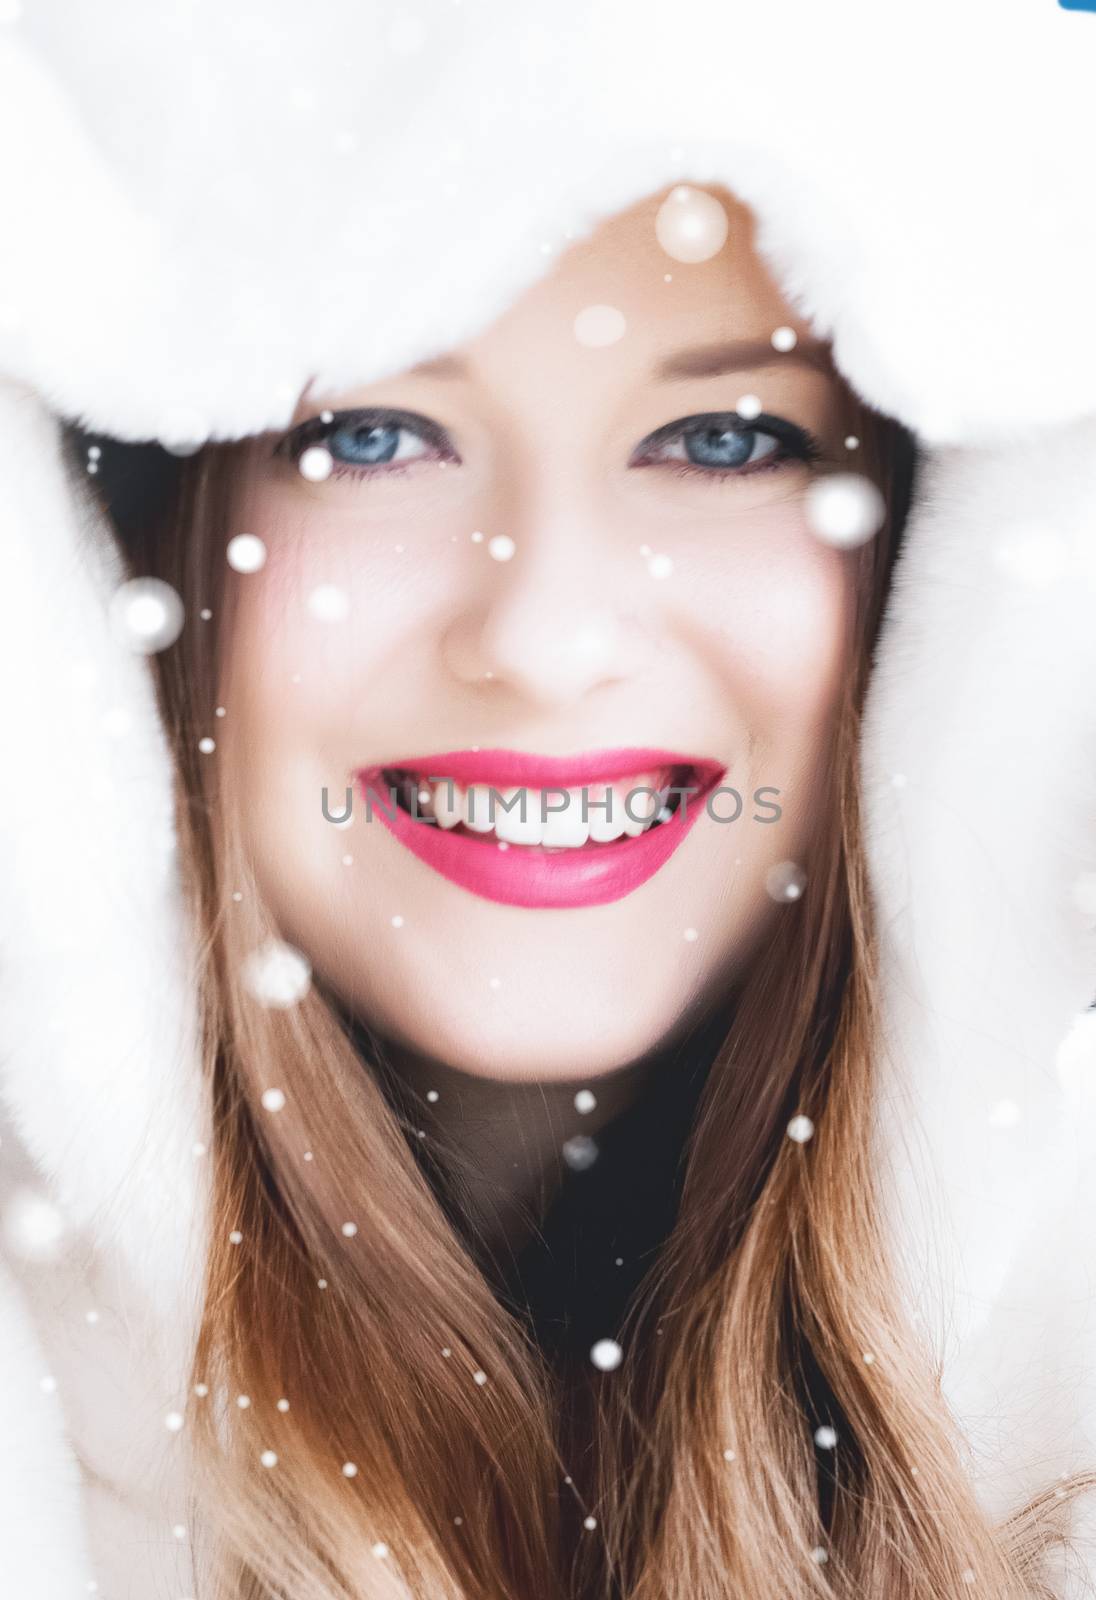 Happy Christmas and winter holiday portrait of young woman in wh by Anneleven